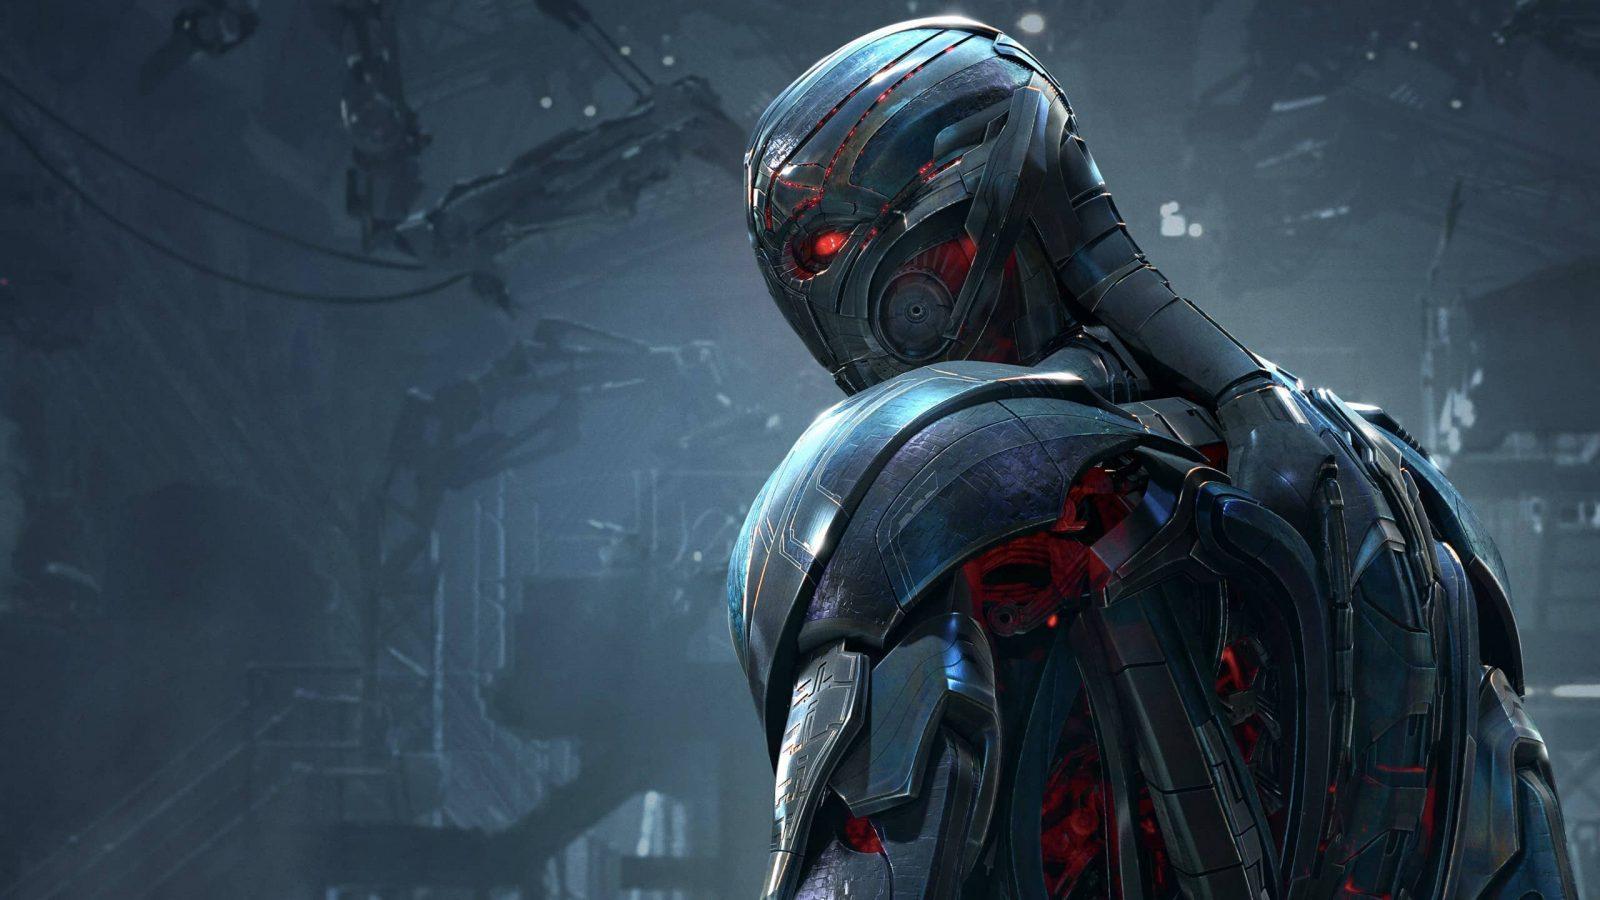 James Spader as Ultron in Avengers: Age of Ultron, the second team-up movie of the Marvel Cinematic Universe.